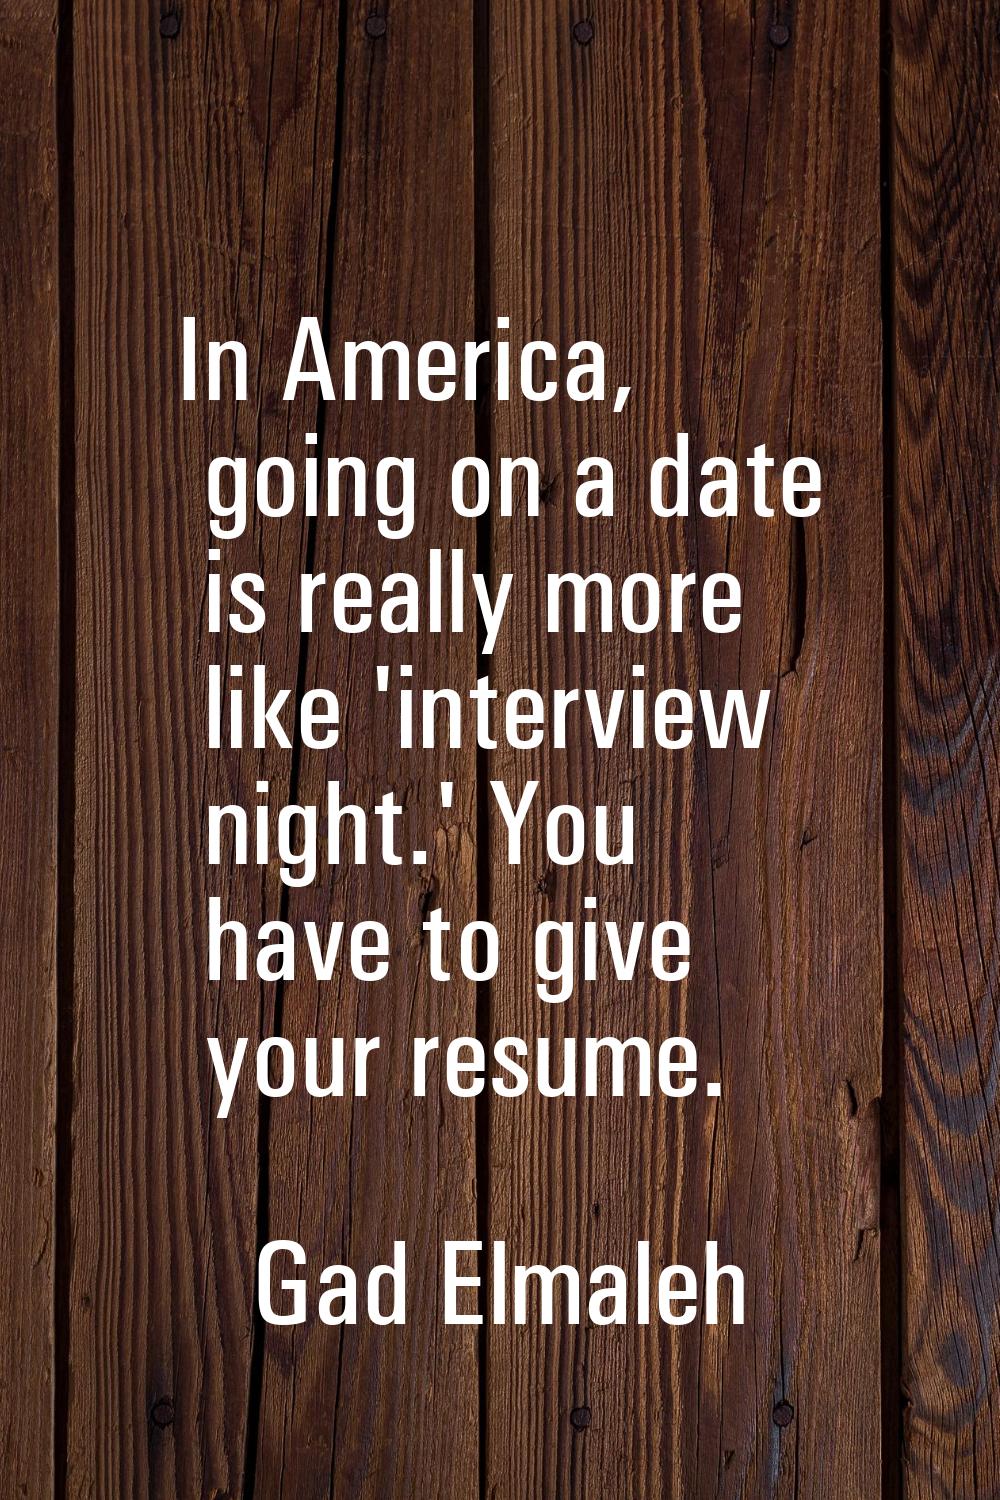 In America, going on a date is really more like 'interview night.' You have to give your resume.